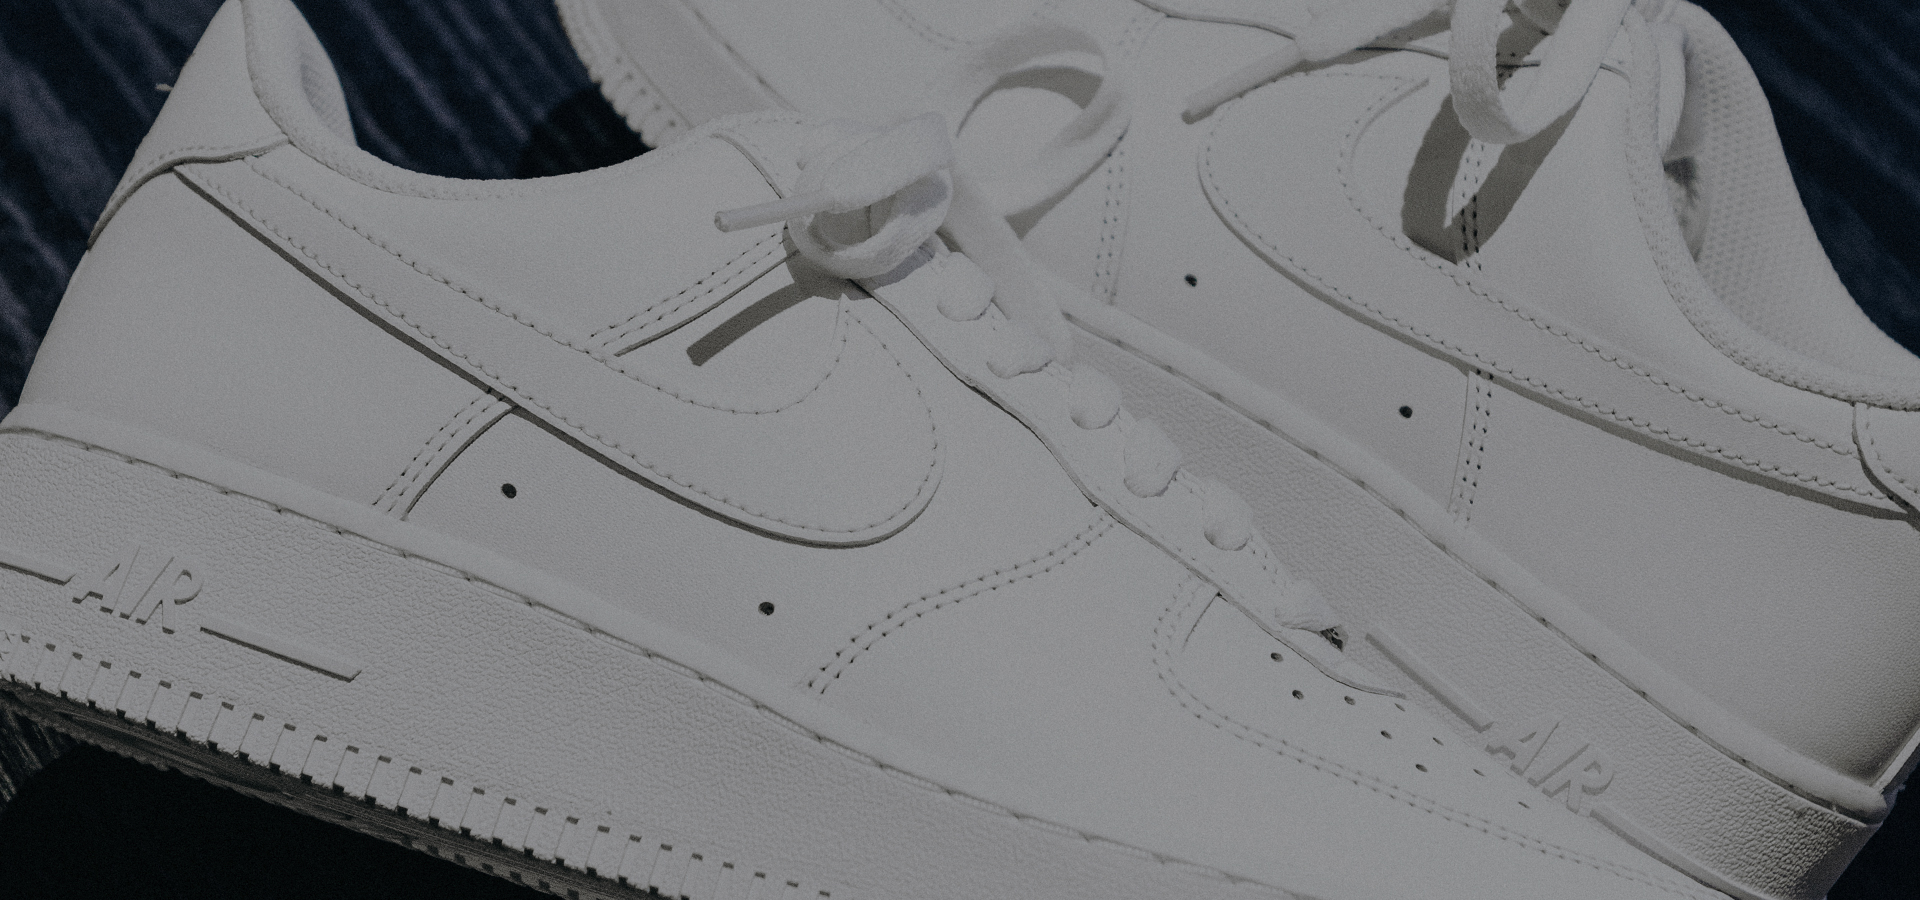 Nike's Latest Air Force 1 'Anniversary Edition' Serves Up Spliced  Colourblocking - Sneaker Freaker